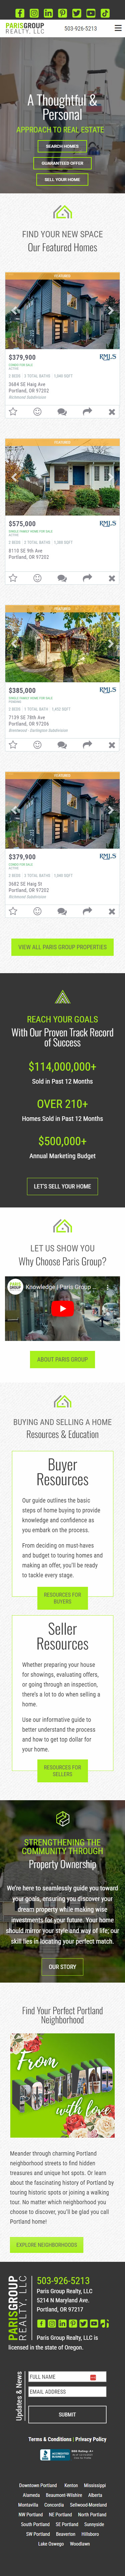 Image for Paris Group Realty